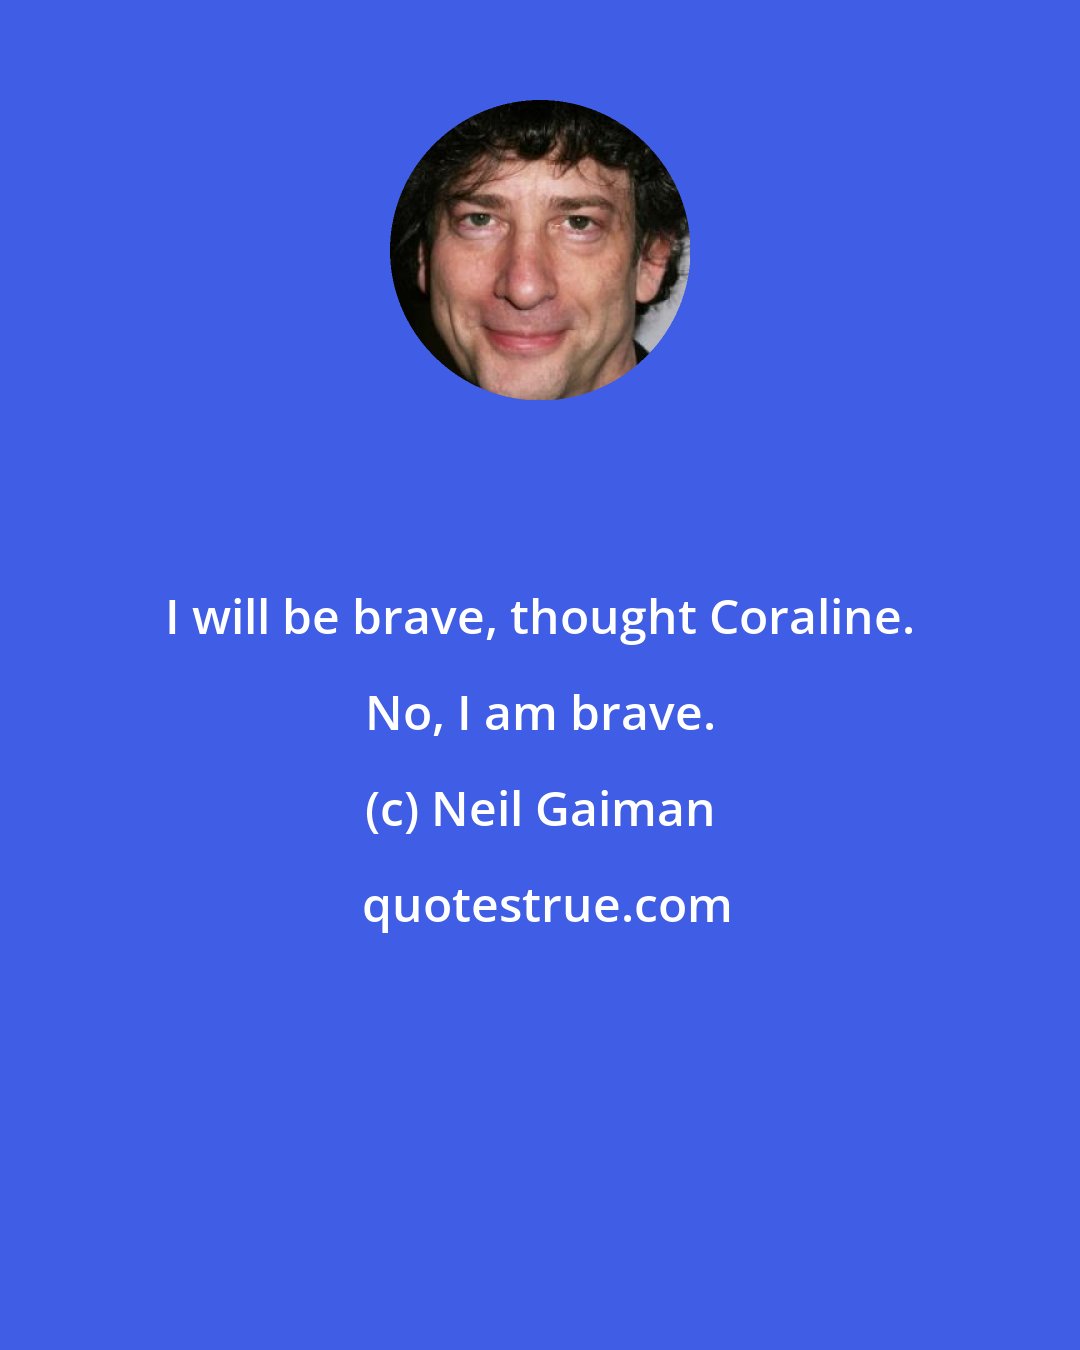 Neil Gaiman: I will be brave, thought Coraline. No, I am brave.